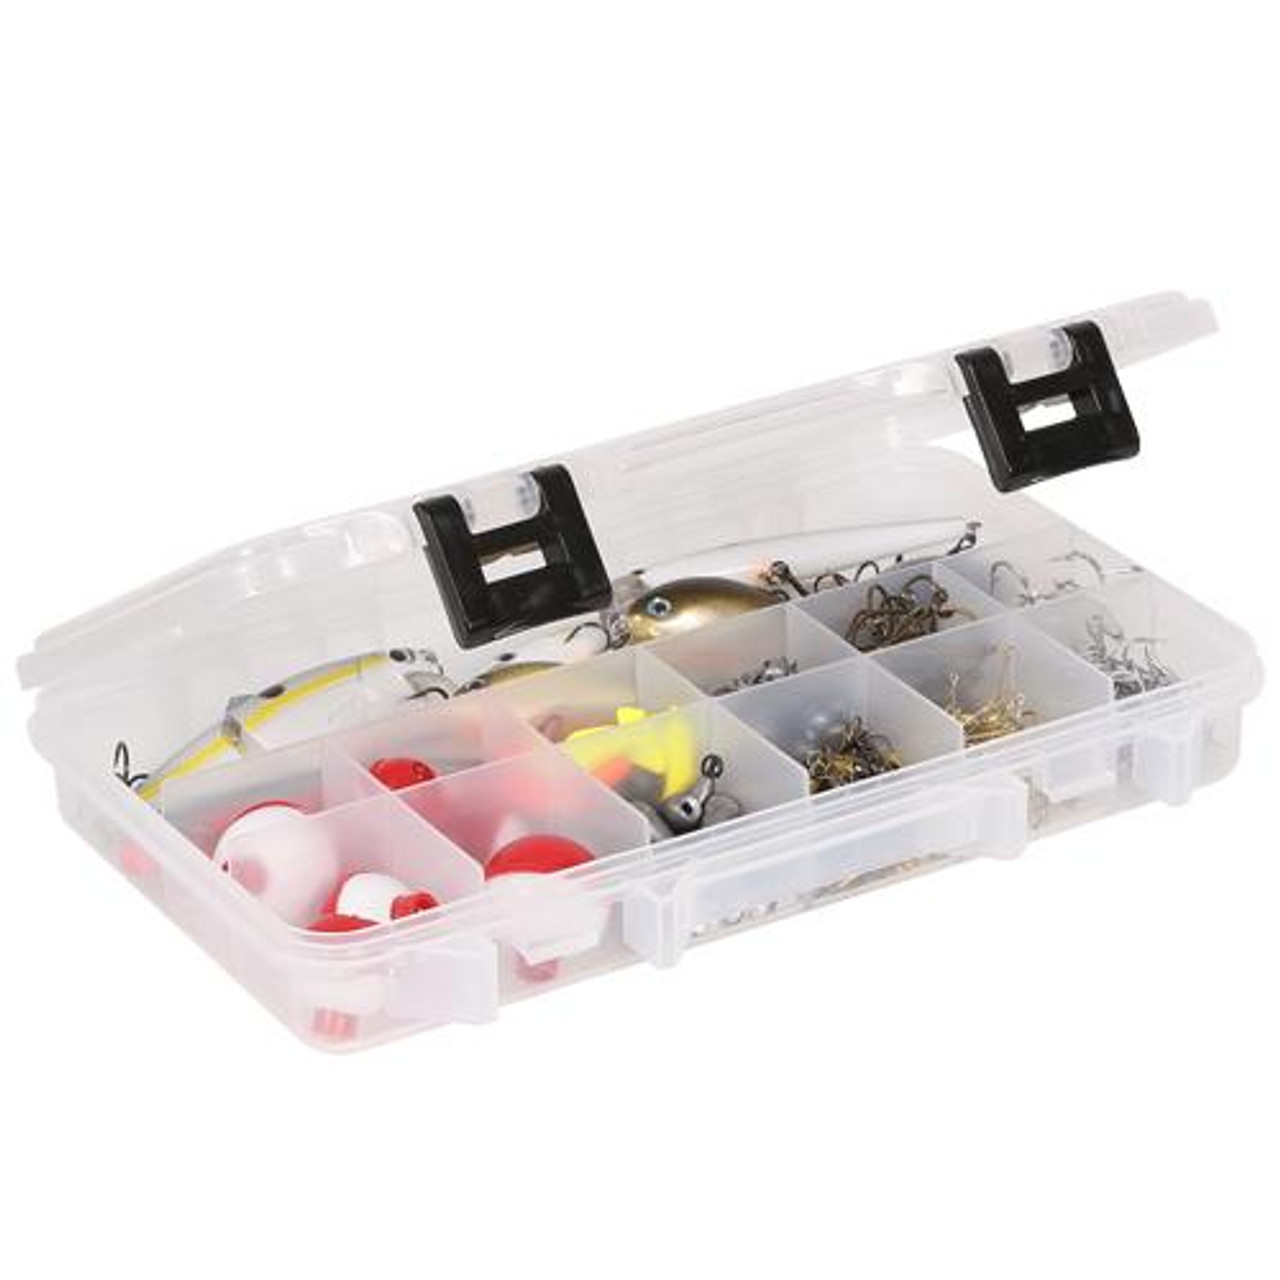 Plano ProLatch StowAway Tackle Boxes, 13 Fixed Compartments